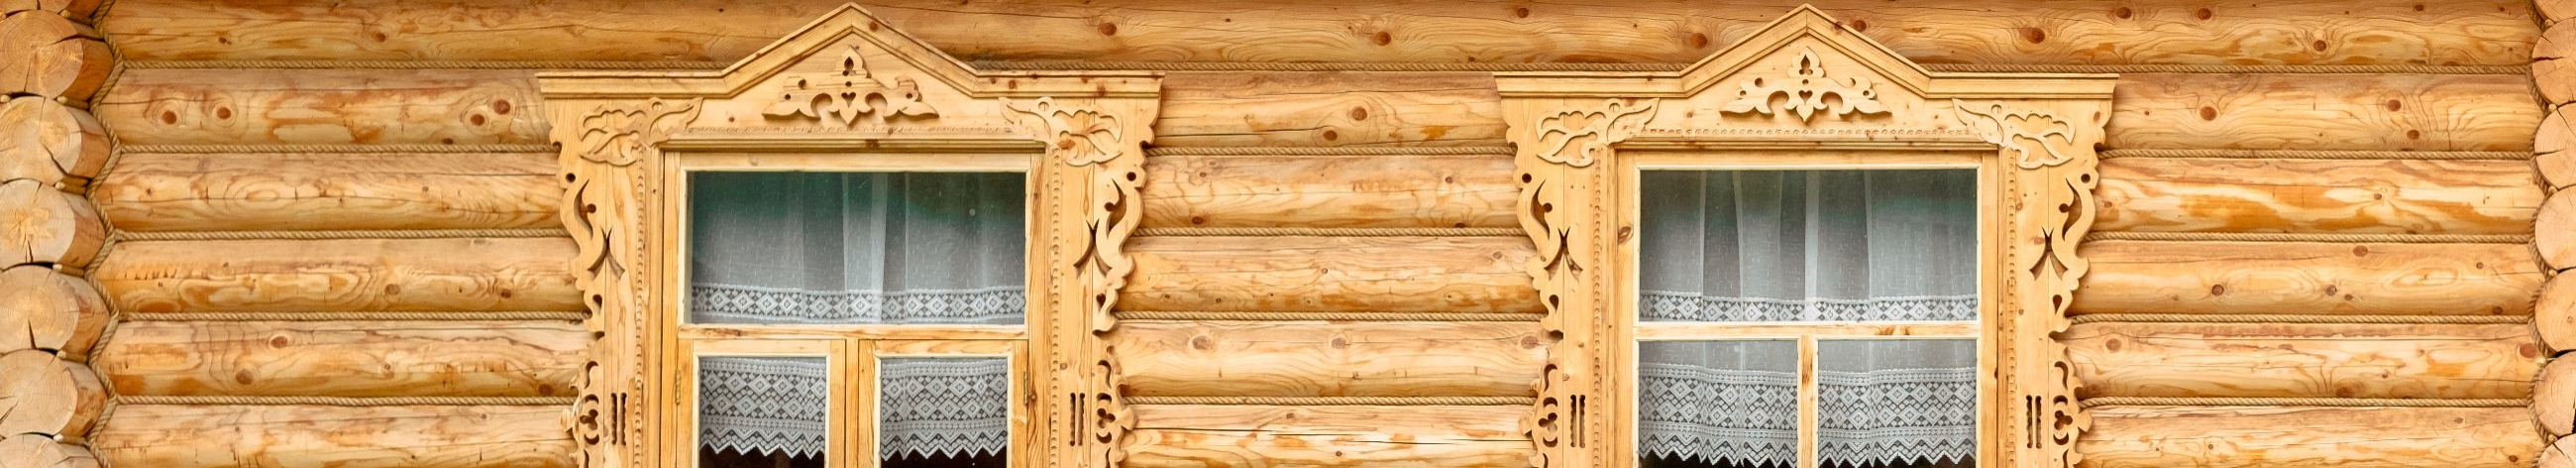 We specialize in making bespoke stairs, restoring wood products, and crafting quality akand and doors.